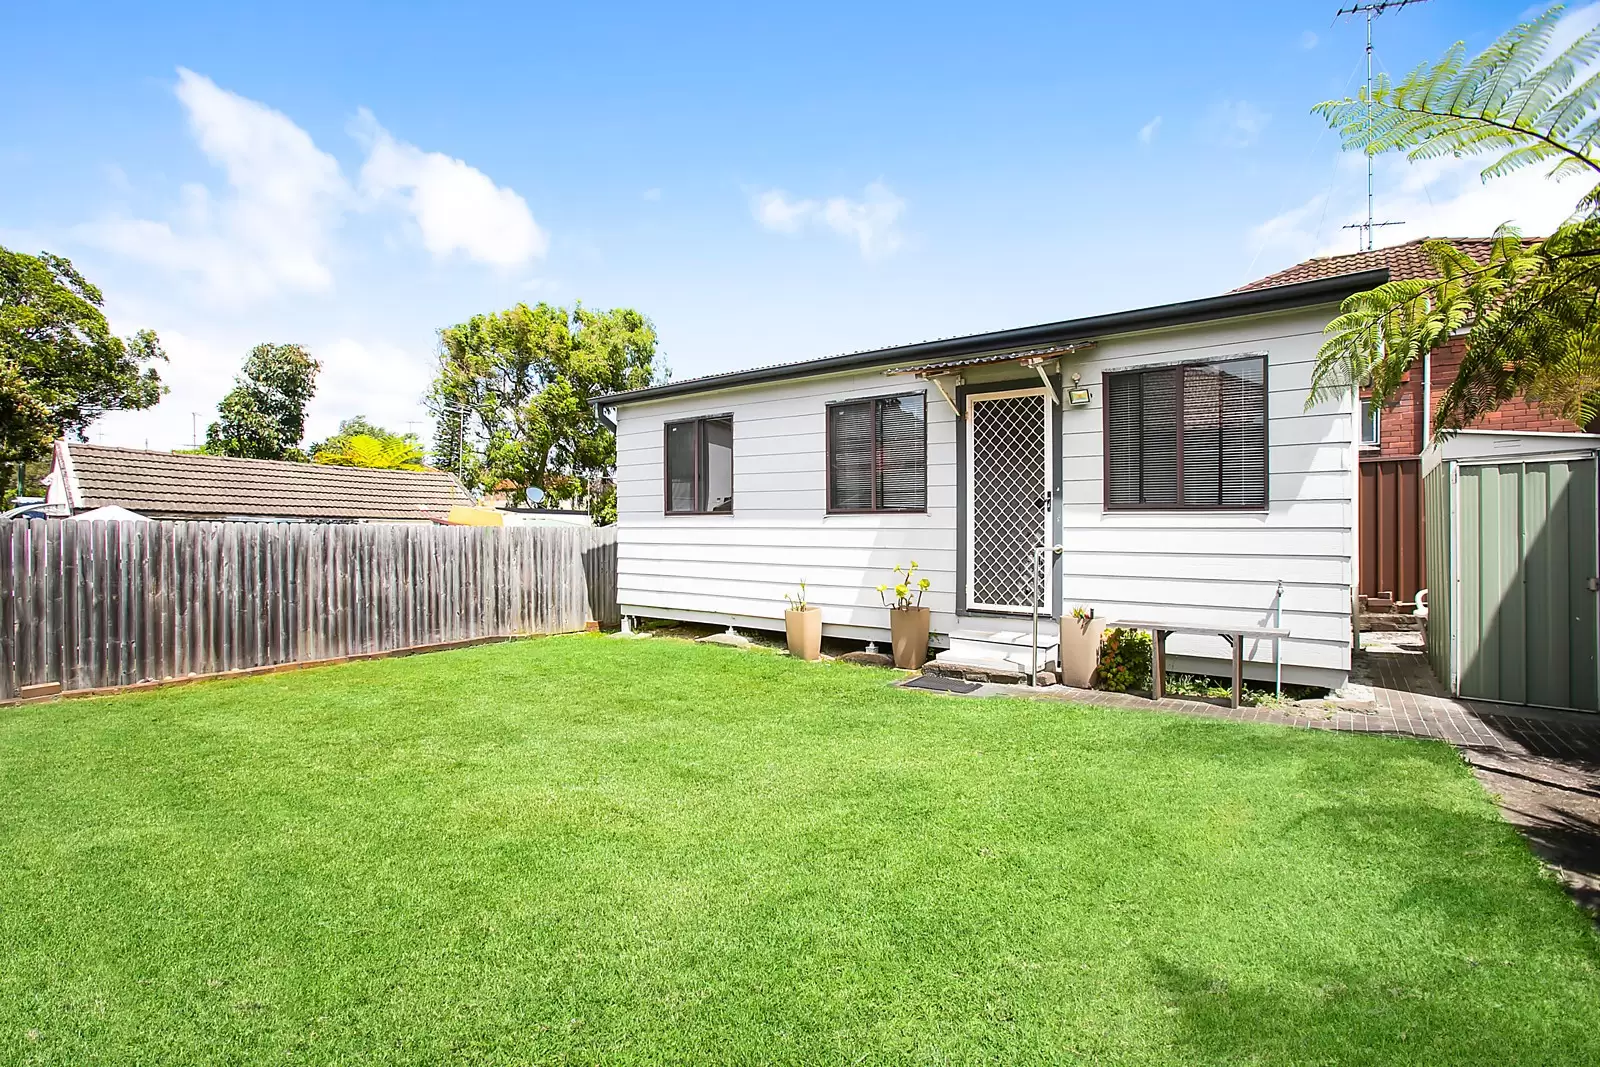 Photo #4: 590 Bunnerong Road, Matraville - Sold by Sydney Sotheby's International Realty